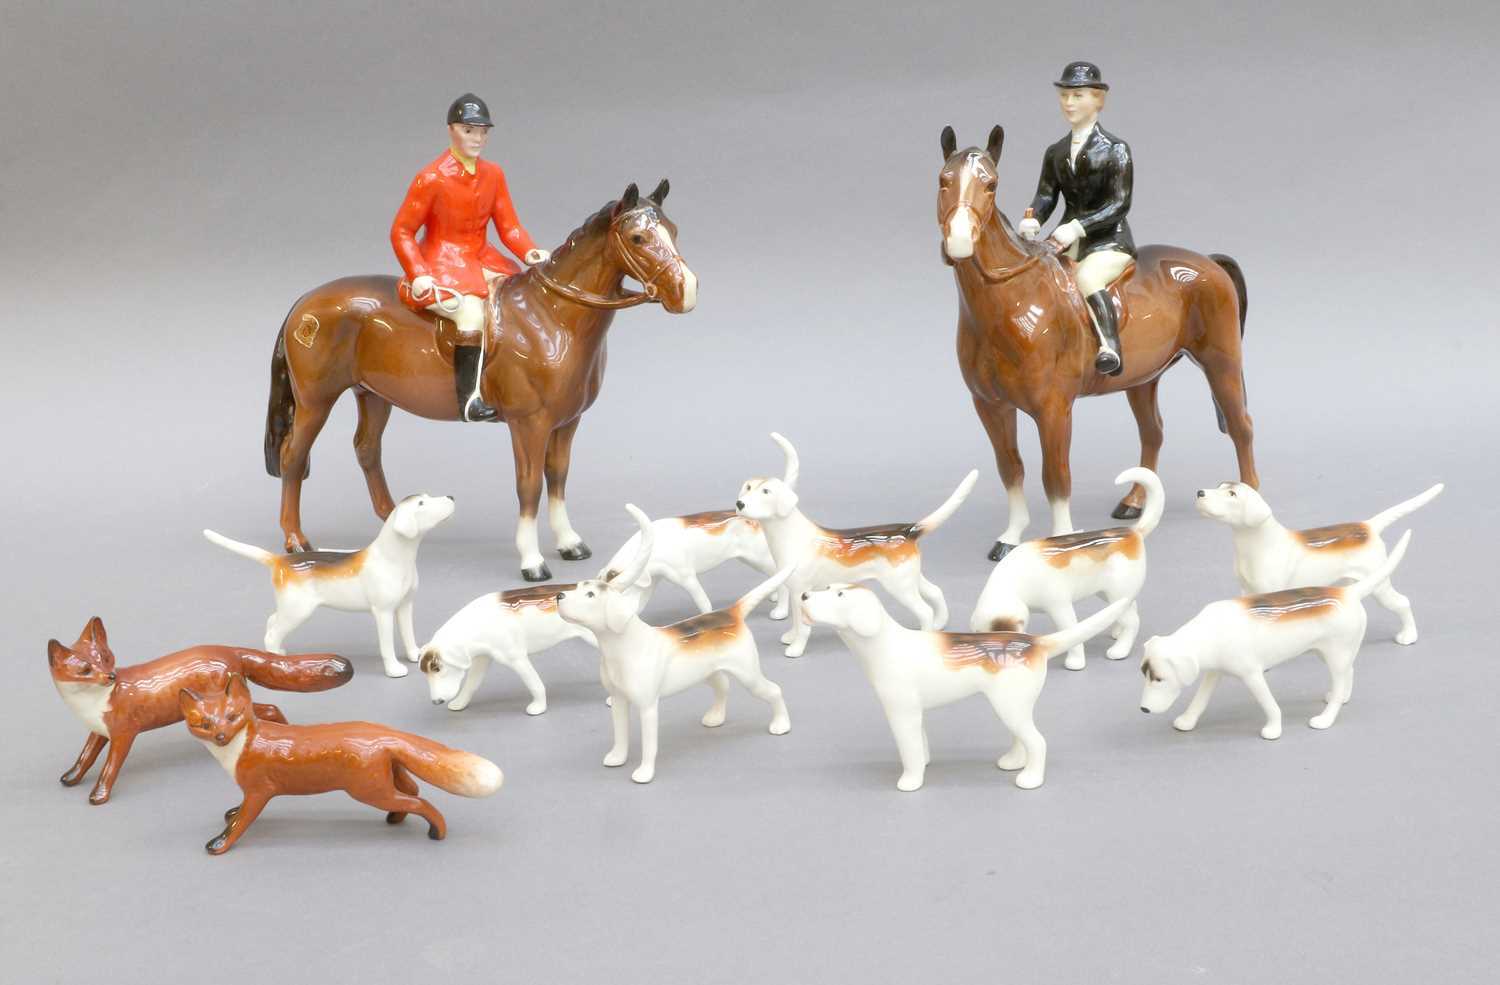 Beswick Hunting Group Comprising: Huntsman (Standing), Style Two, model No. 1501 and Huntswoman (